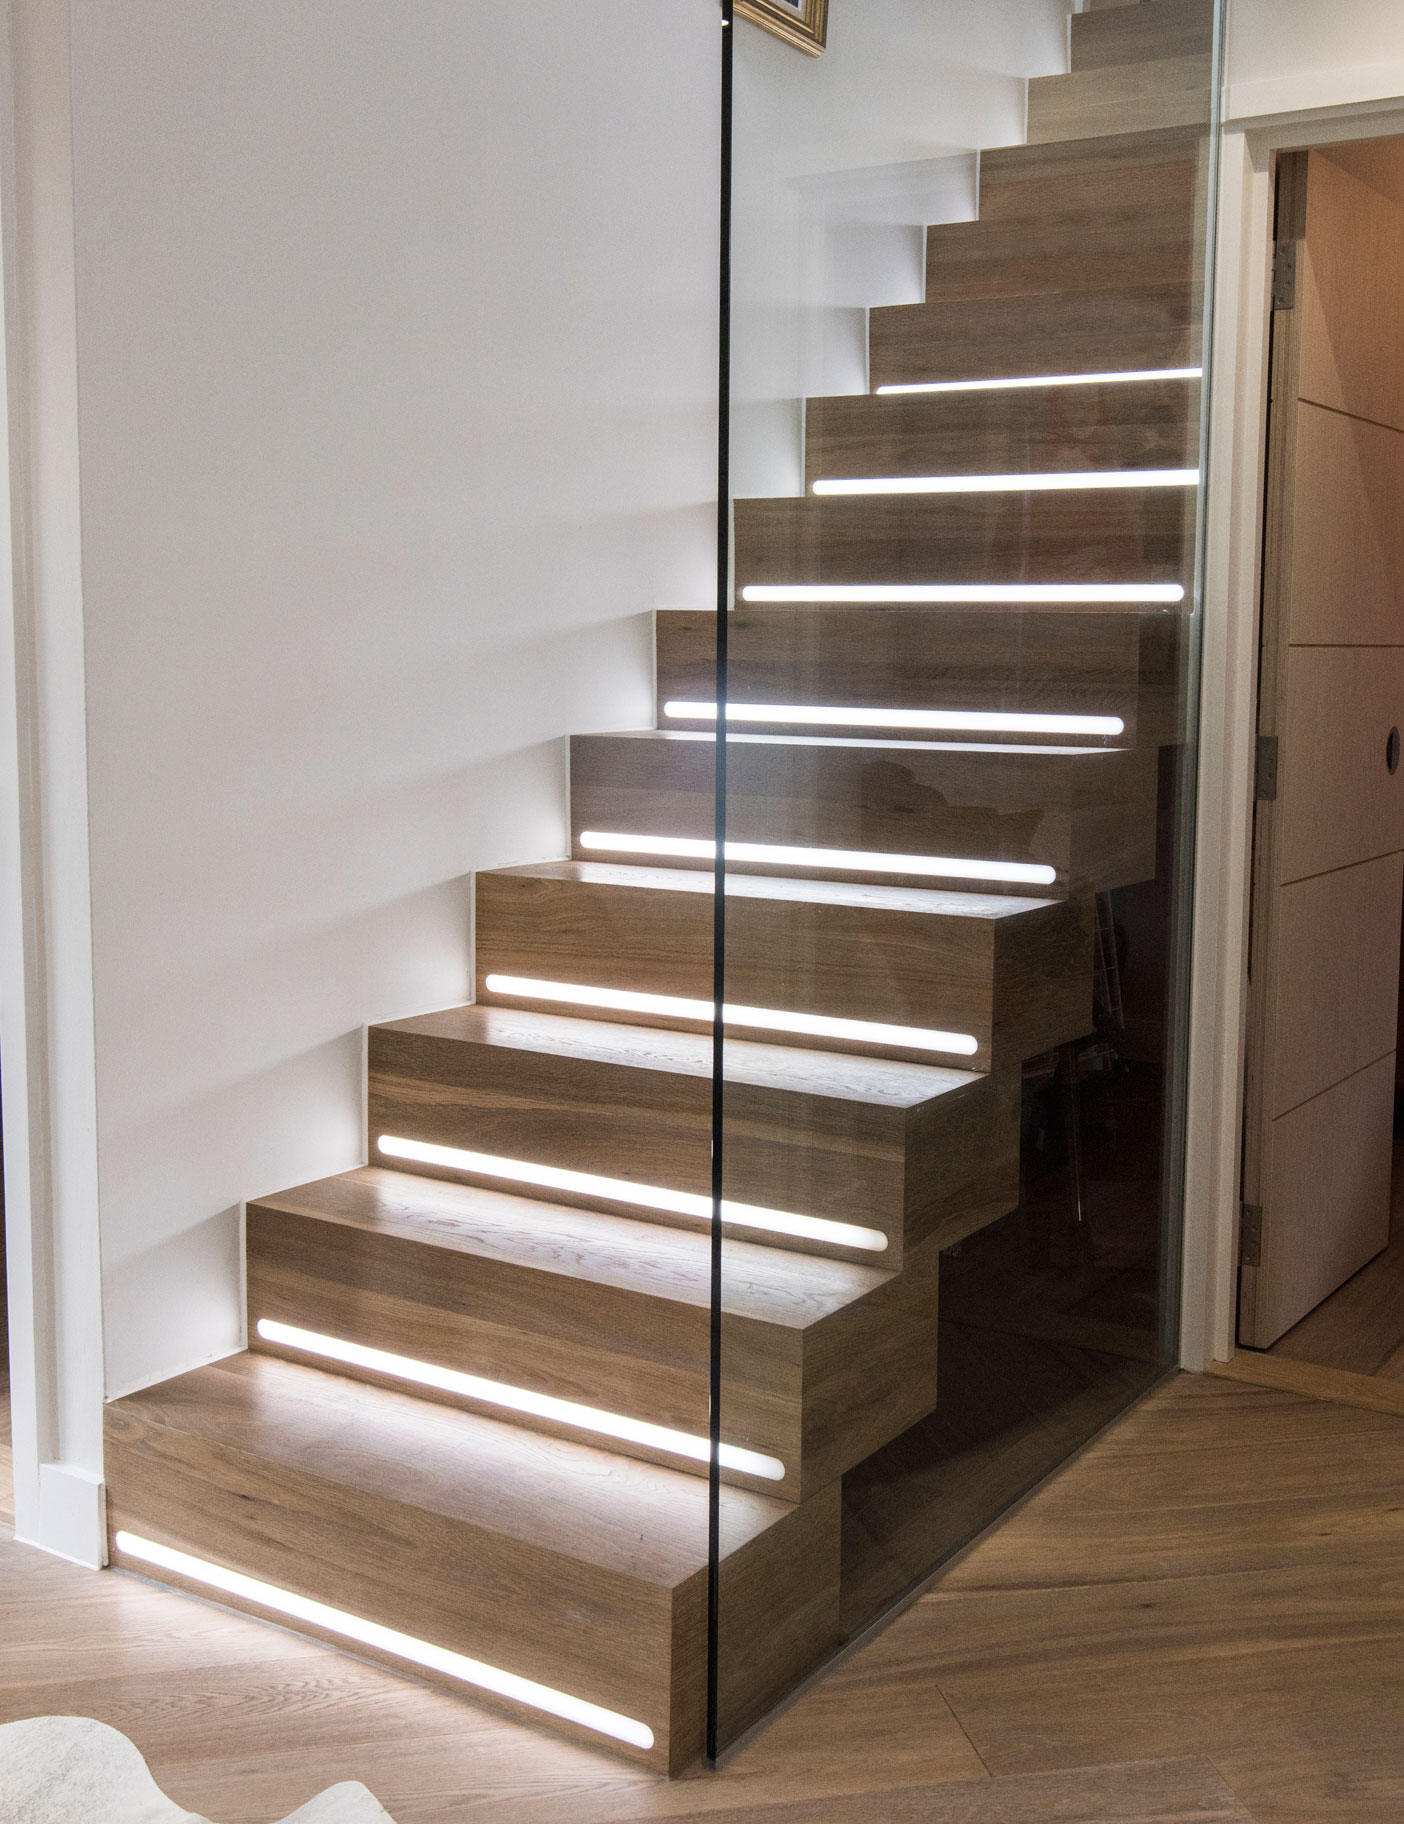 Aldworth James & Bond | Residential Joinery in Bath - staircase detail